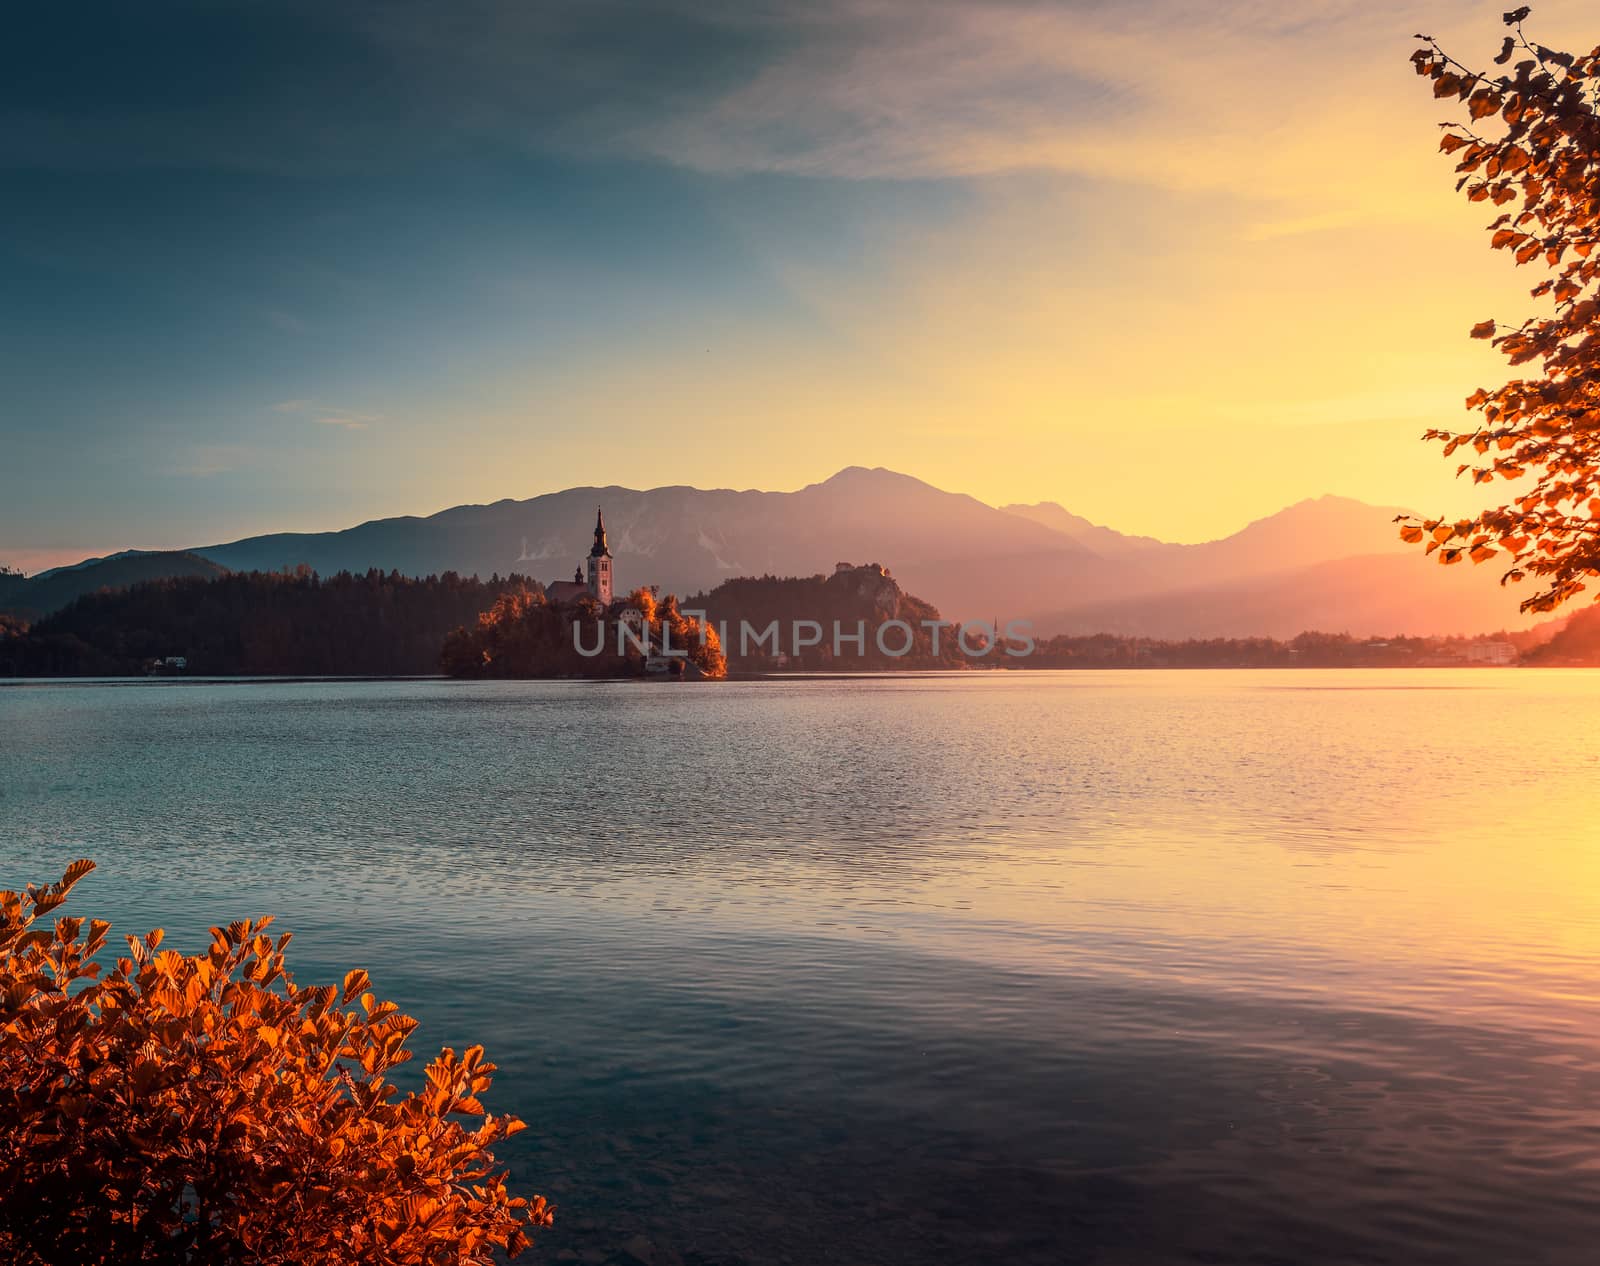 Famous Catholic Church on Little Island in Bled Lake, Slovenia at Autumn Sunrise with Mountains in Background